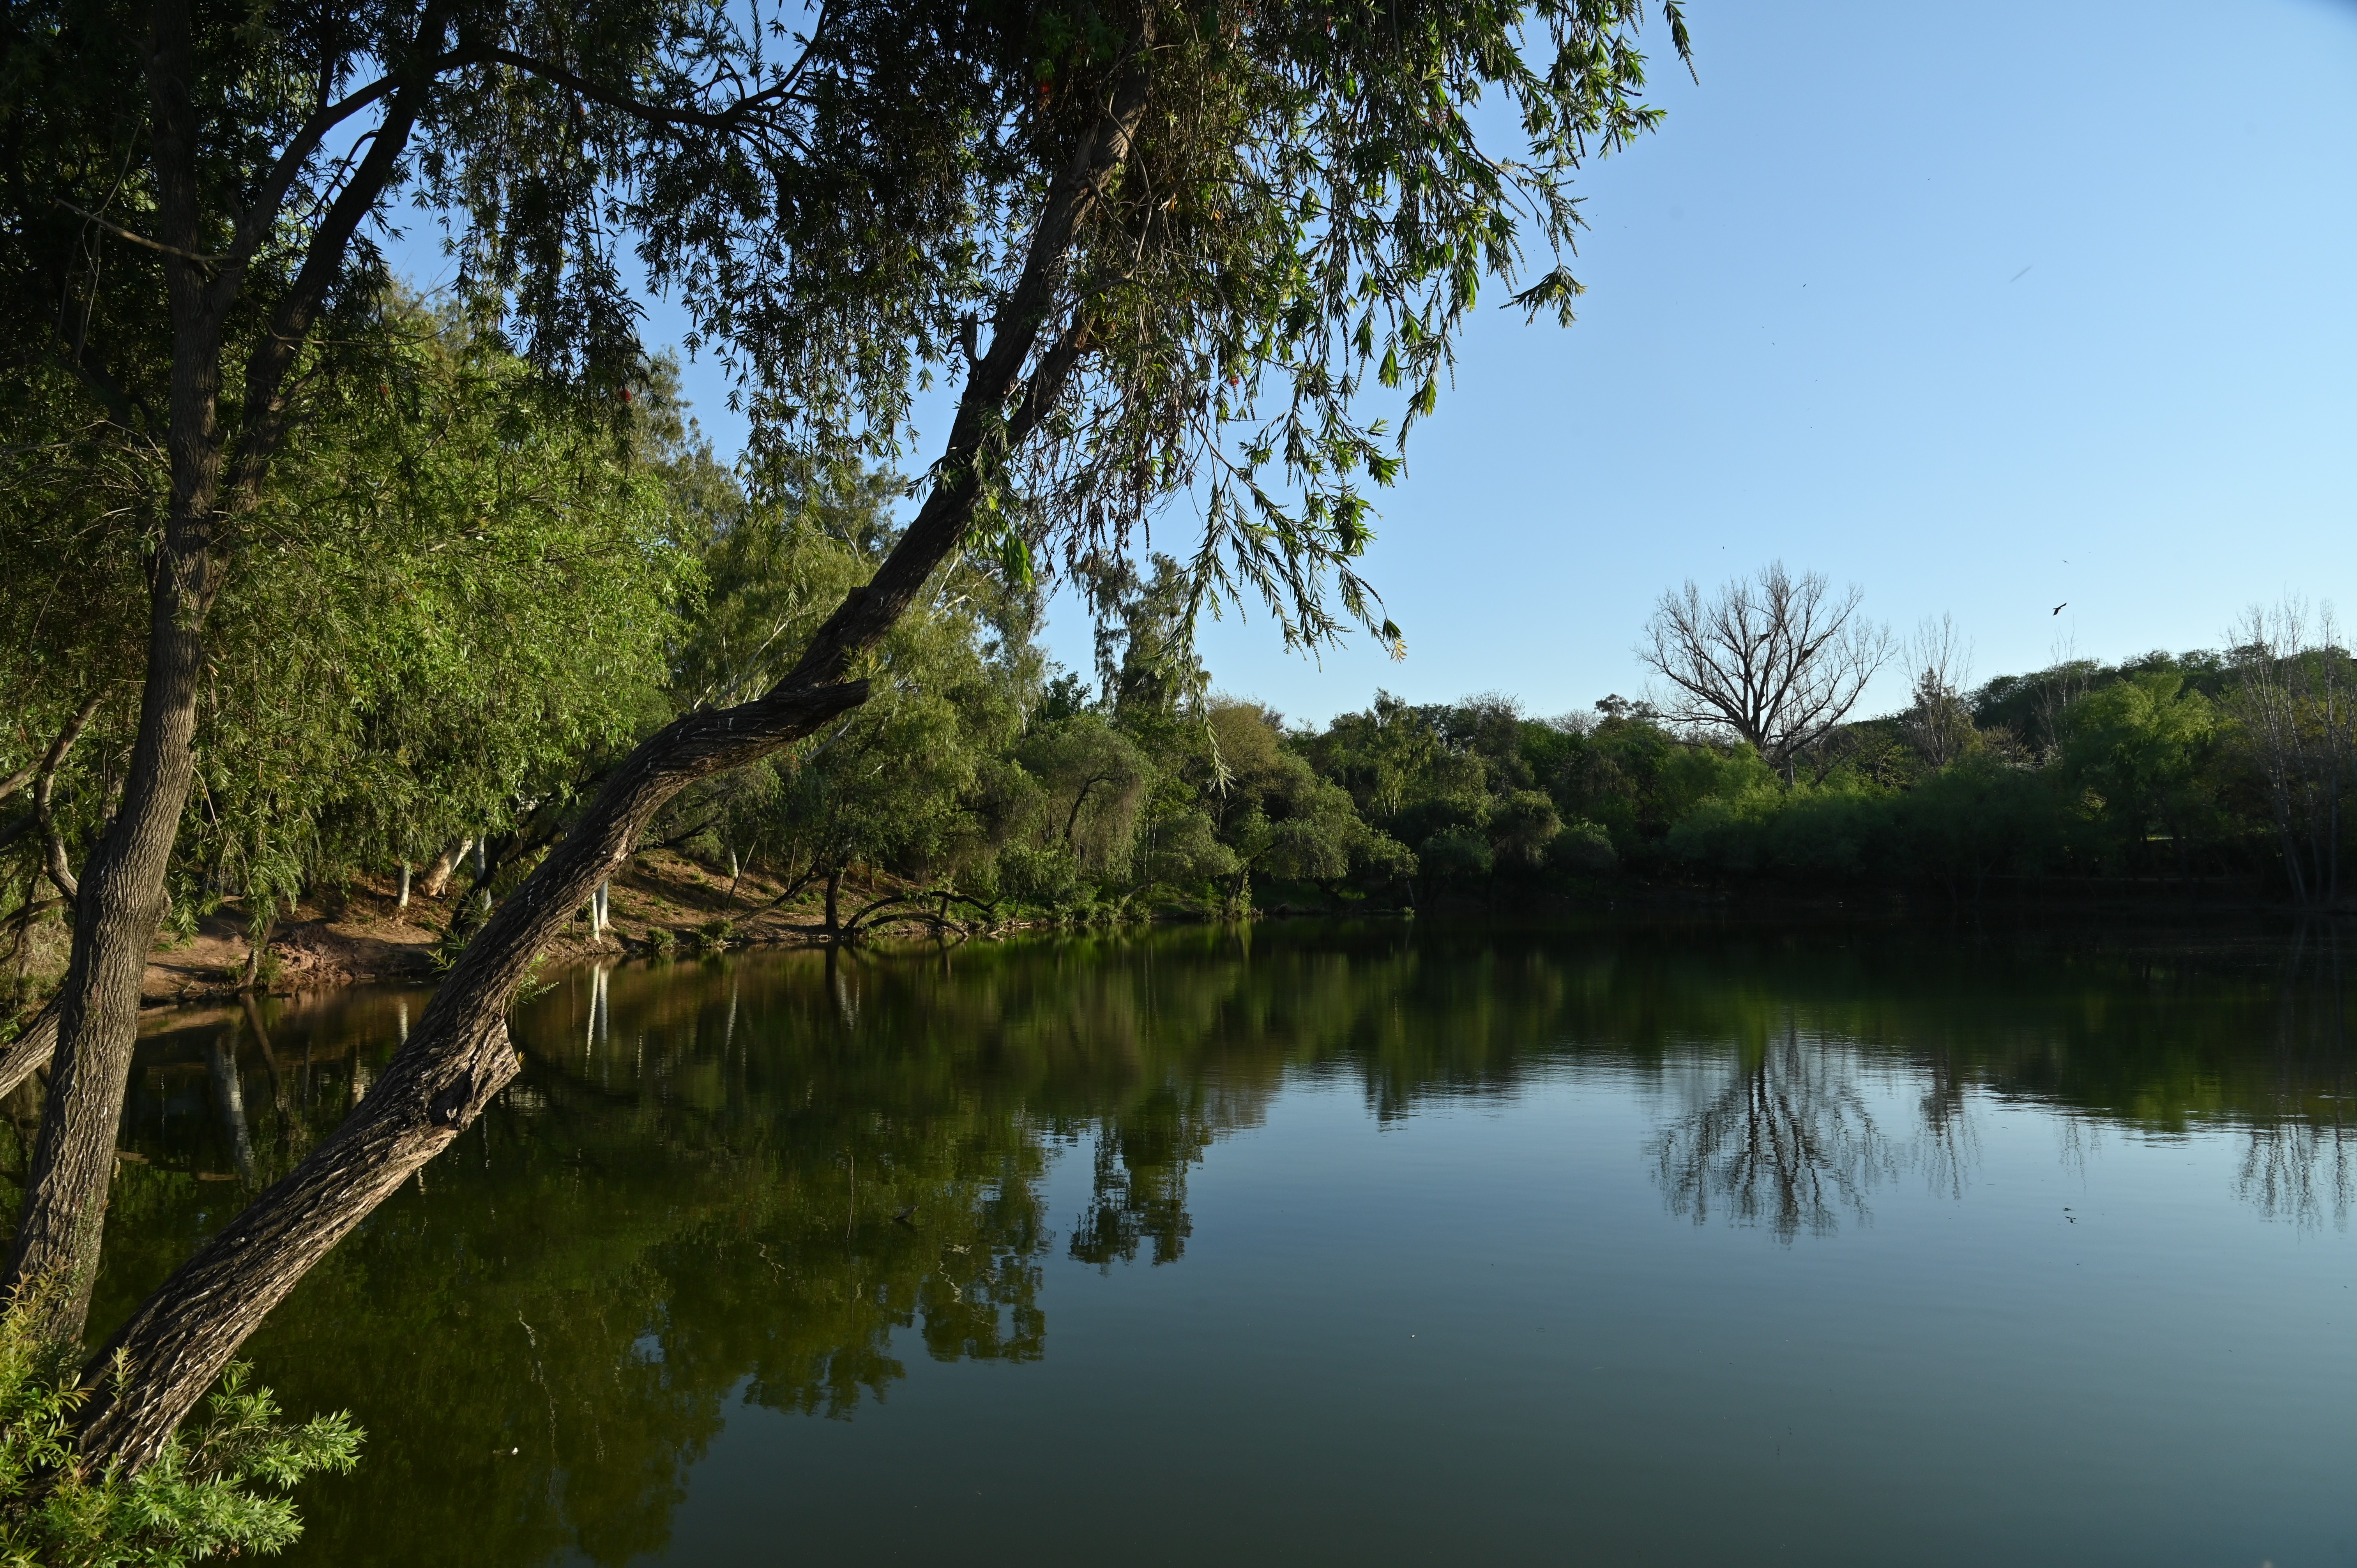 The reflection of the trees in the lake of Ayub Park